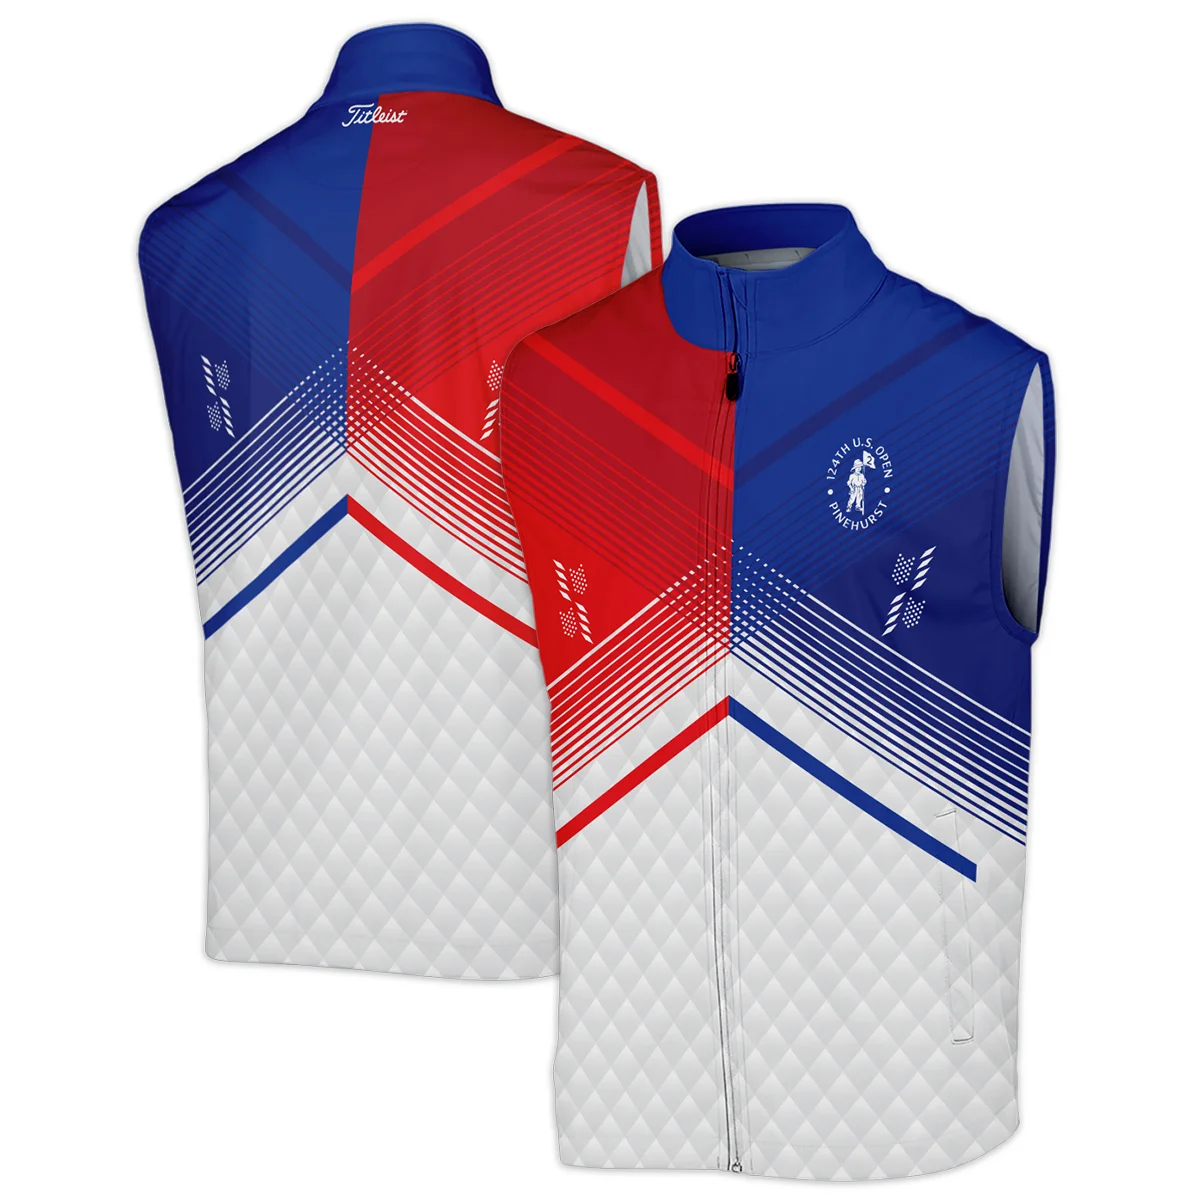 Titleist 124th U.S. Open Pinehurst Blue Red Line White Abstract Zipper Polo Shirt Style Classic